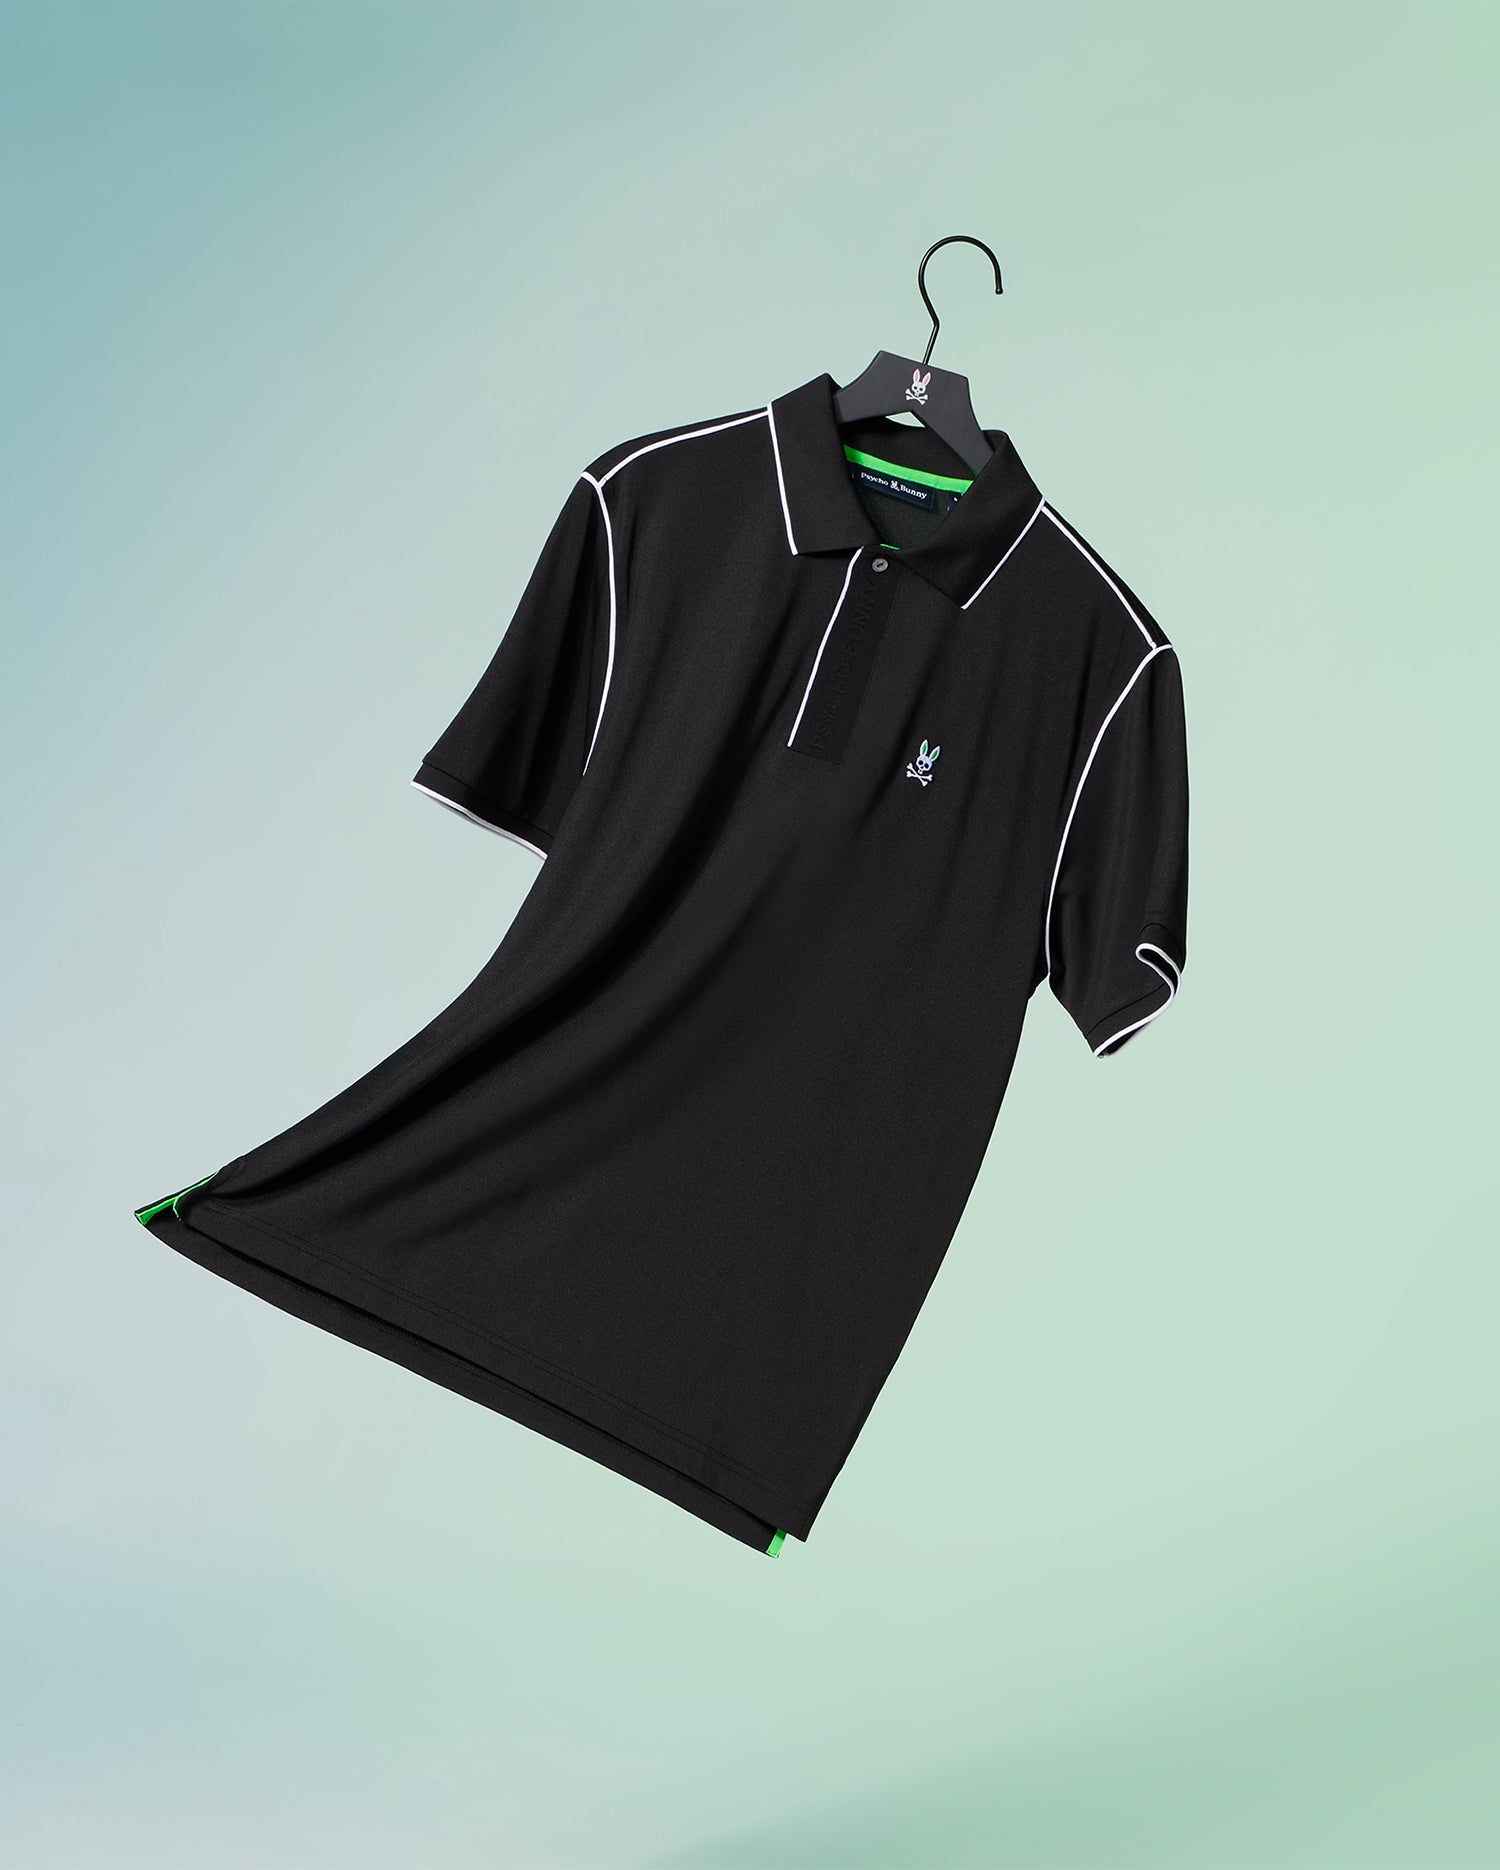 Men's Golf Shirts  Best Prices in Golf Shirts in Canada